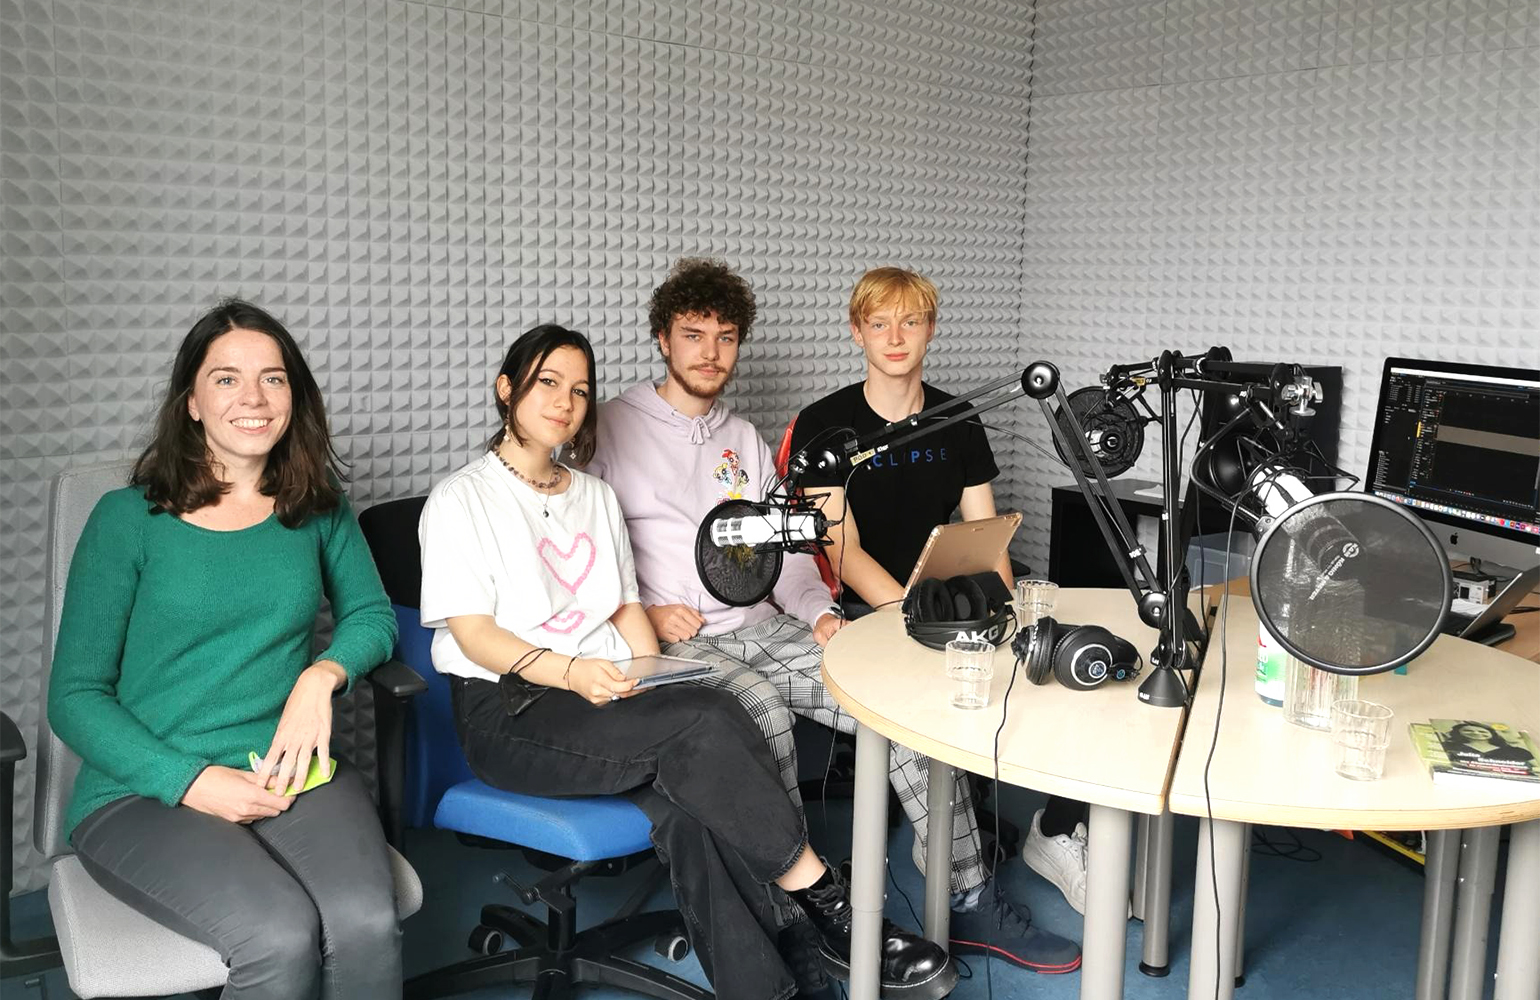 Podcast: Julia Schneider in conversation with students of the Klax school